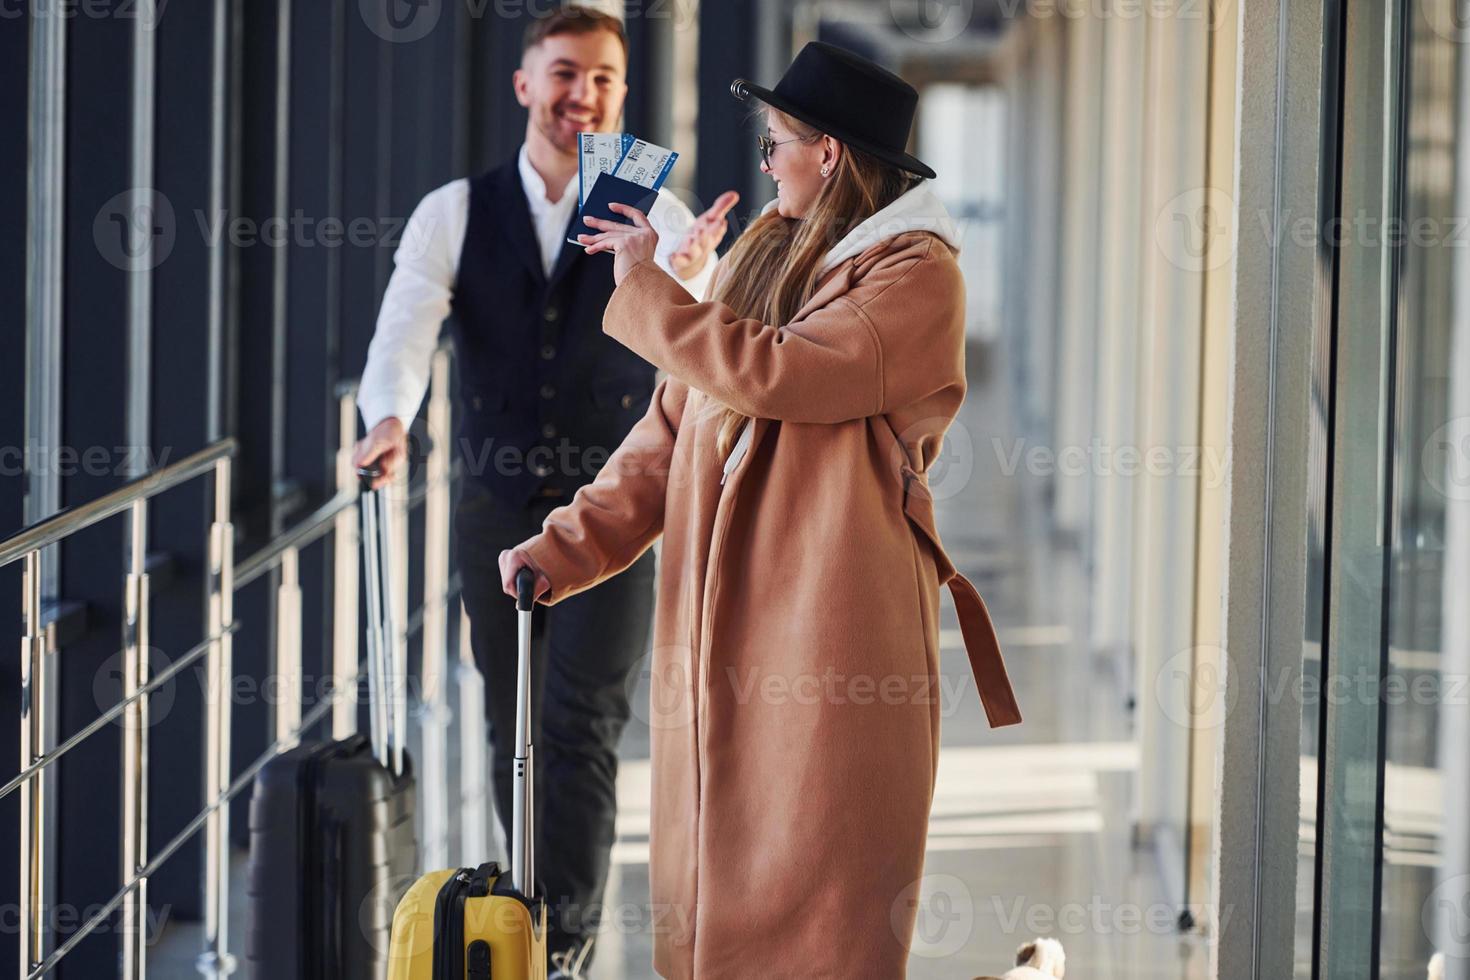 https://static.vecteezy.com/system/resources/previews/015/288/054/non_2x/female-passenger-in-warm-clothes-with-dog-and-with-baggage-walk-with-man-in-formal-wear-photo.jpg